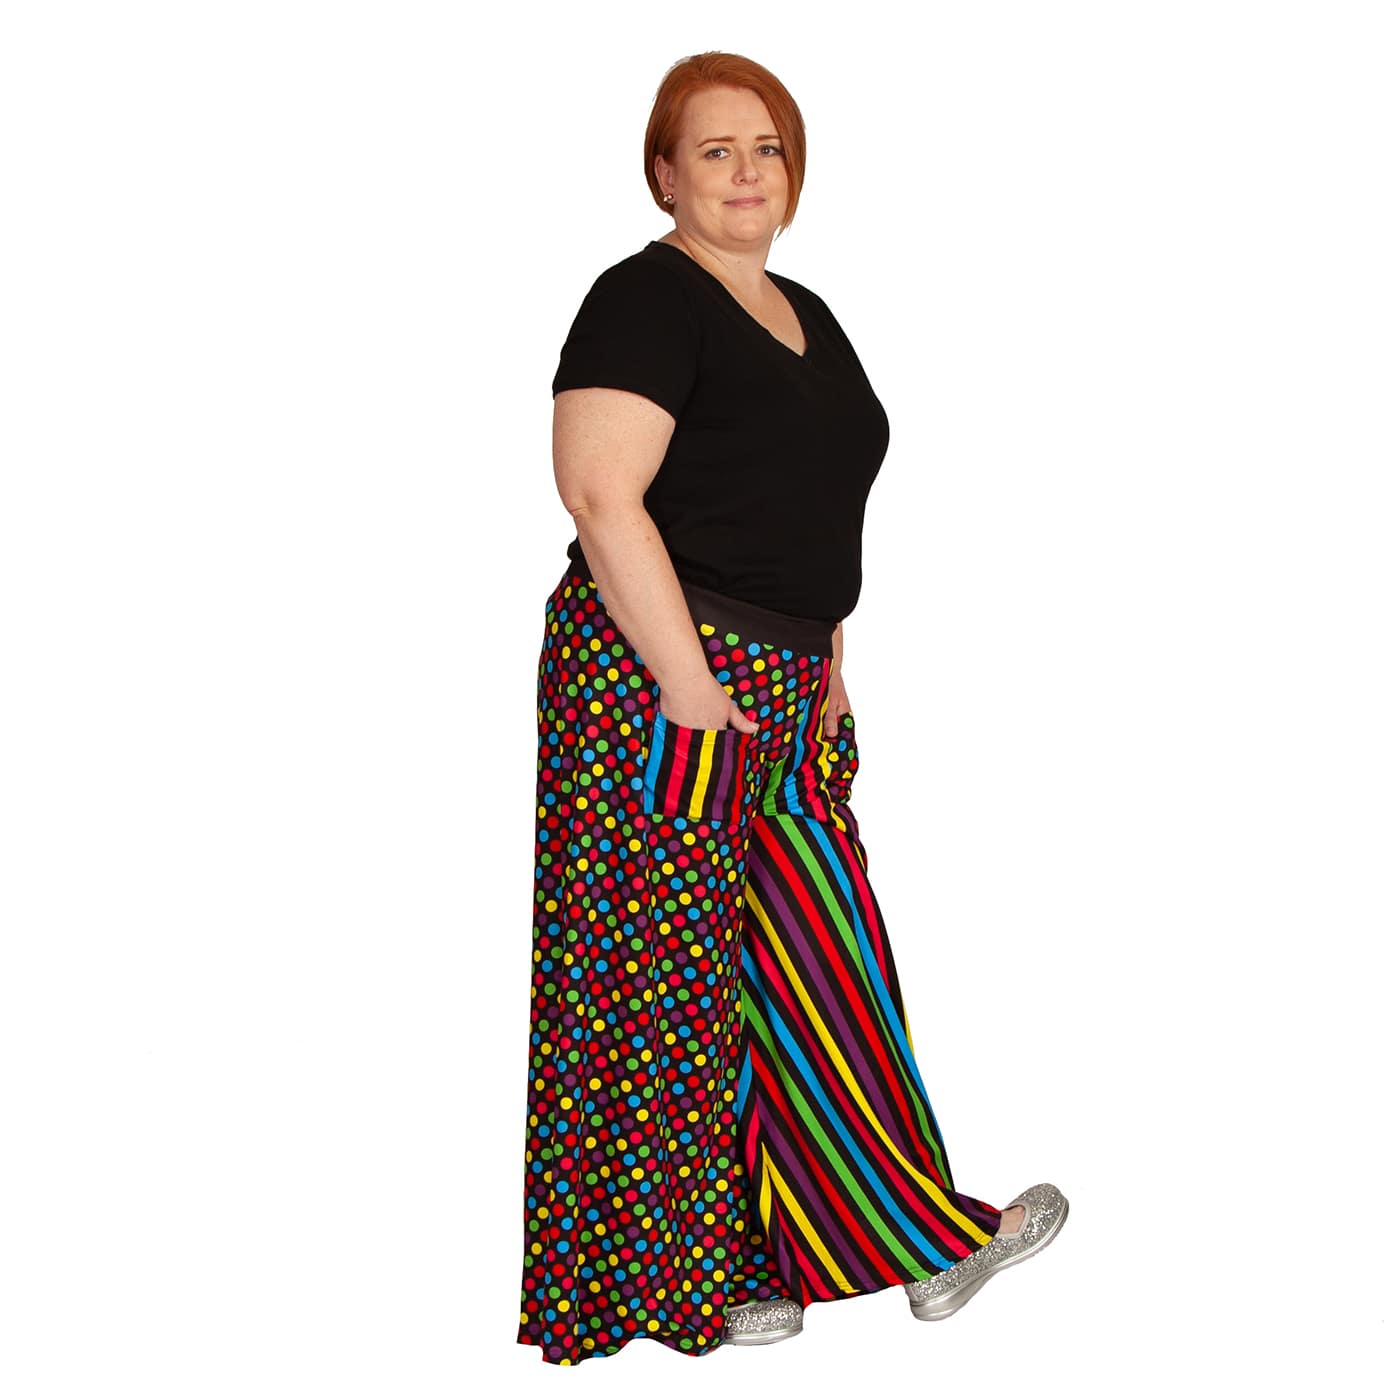 Confetti Wide Leg Pants by RainbowsAndFairies.com (Rainbow Colours - Polka Dots - Stripes - Vibrant - Pallazo Pants - Vintage Inspired - Pants With Pockets) - SKU: CL_WIDEL_CONFT_ORG - Pic 07